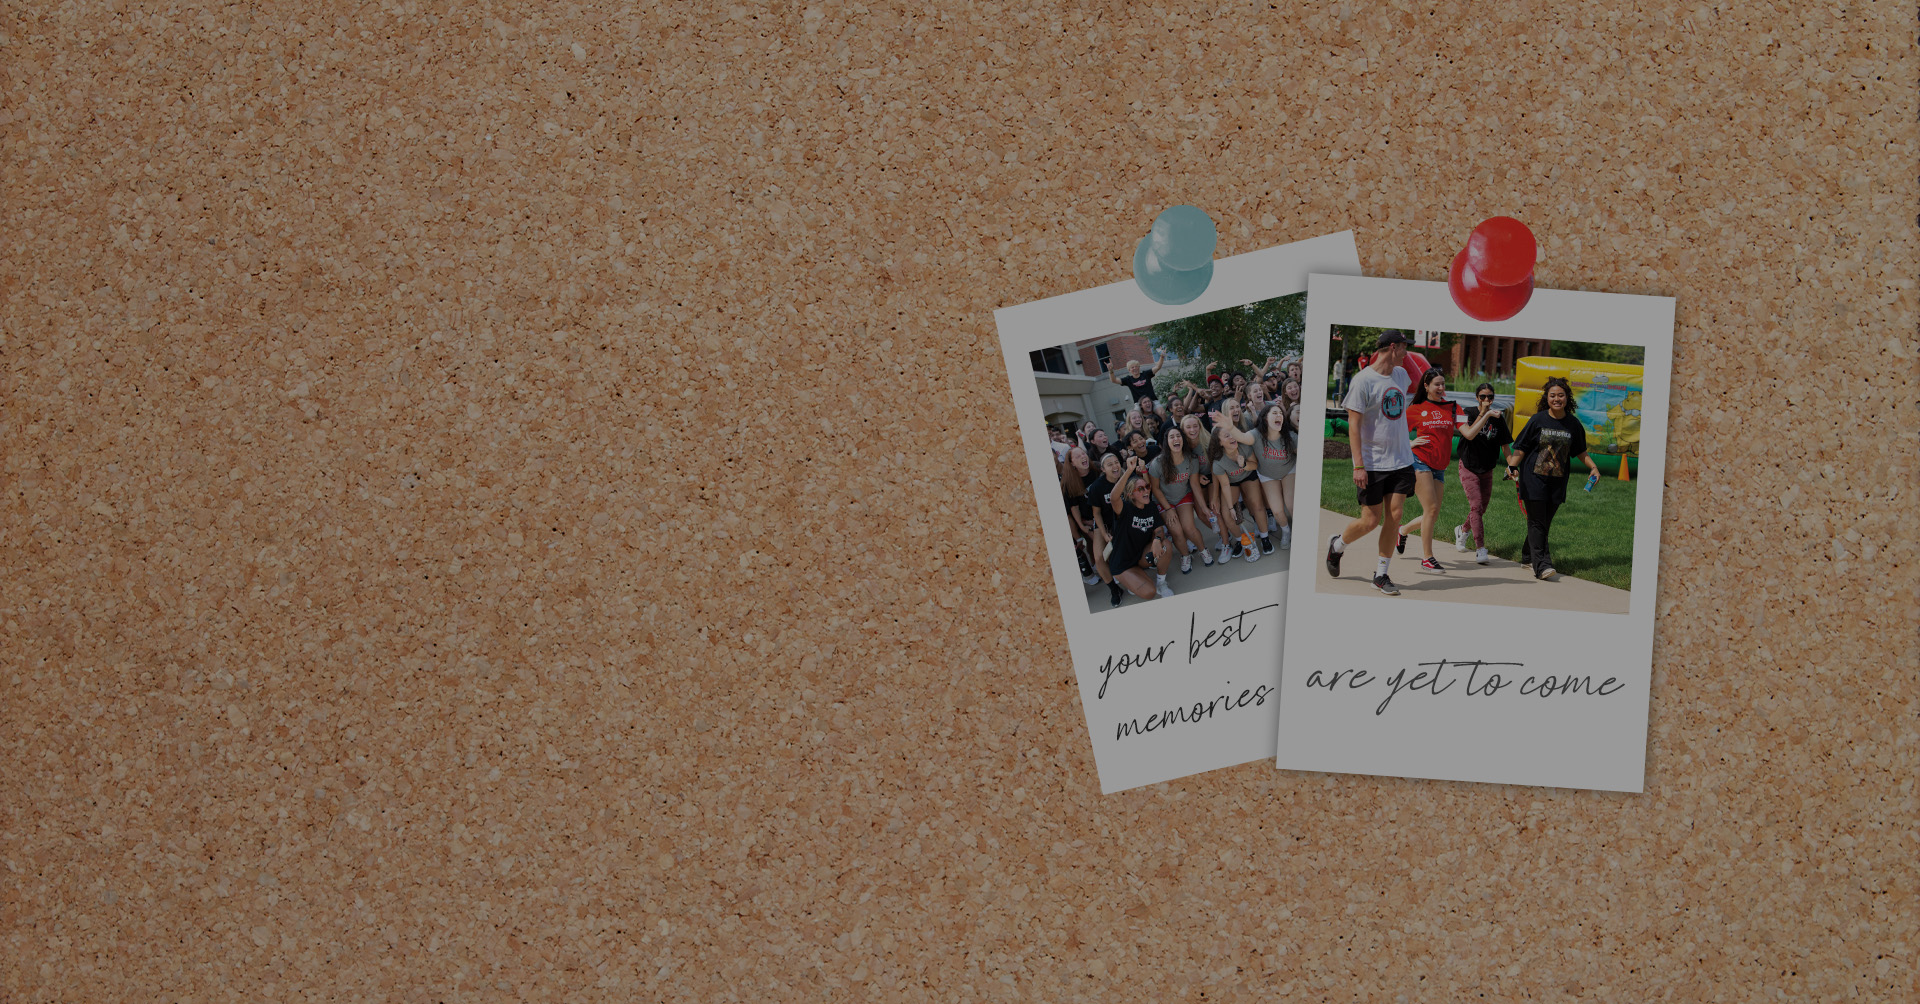 two photos of people are pinned to a cork board.